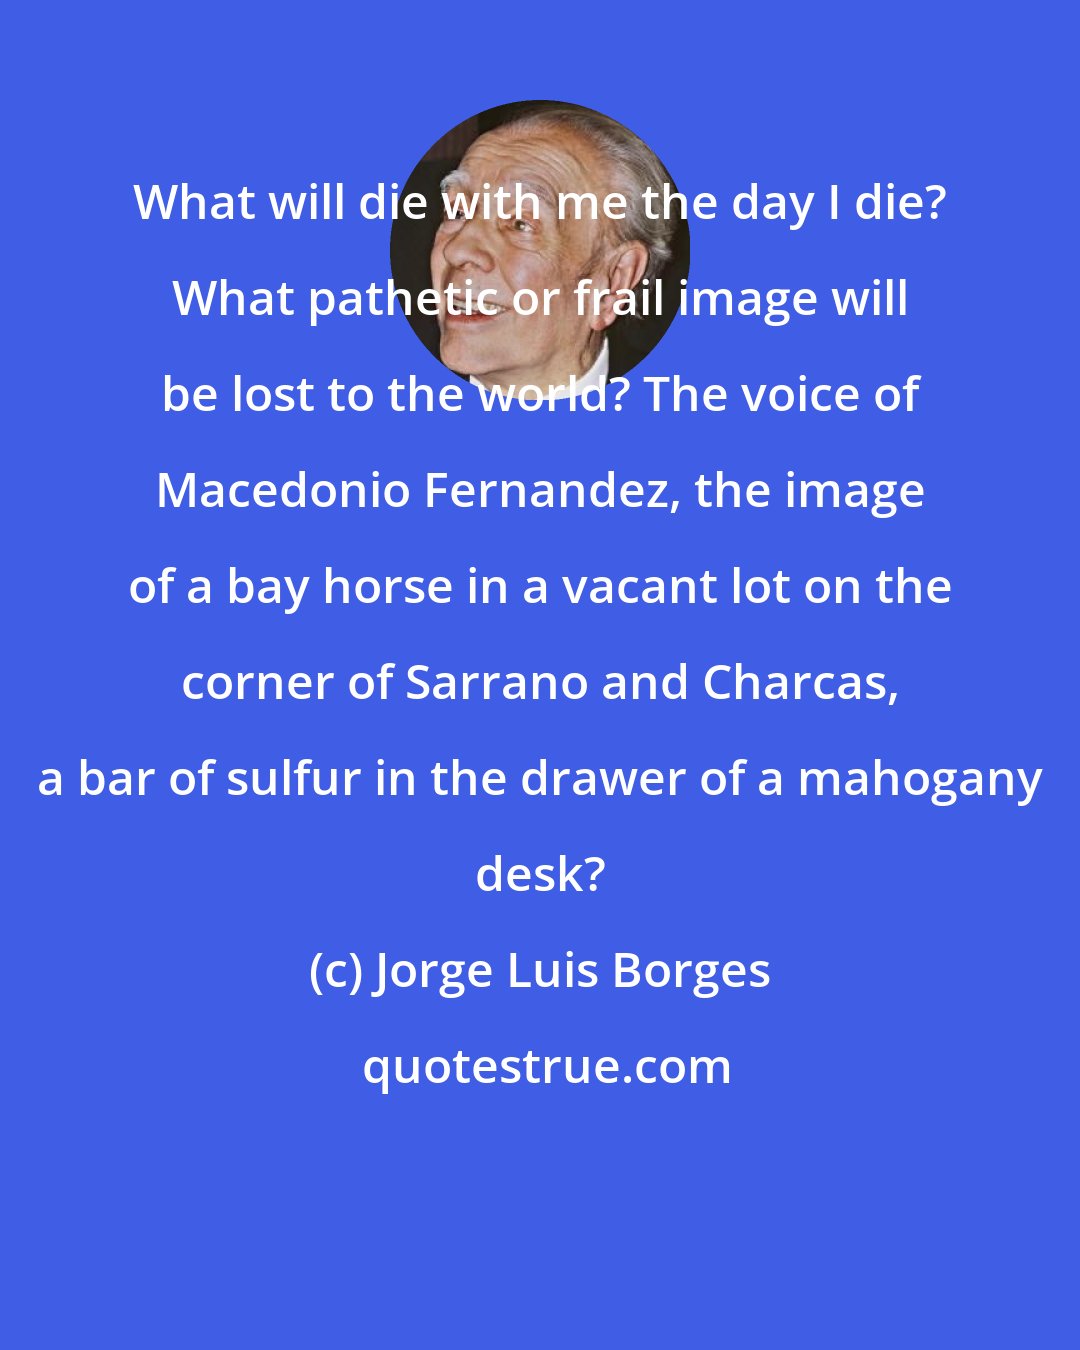 Jorge Luis Borges: What will die with me the day I die? What pathetic or frail image will be lost to the world? The voice of Macedonio Fernandez, the image of a bay horse in a vacant lot on the corner of Sarrano and Charcas, a bar of sulfur in the drawer of a mahogany desk?